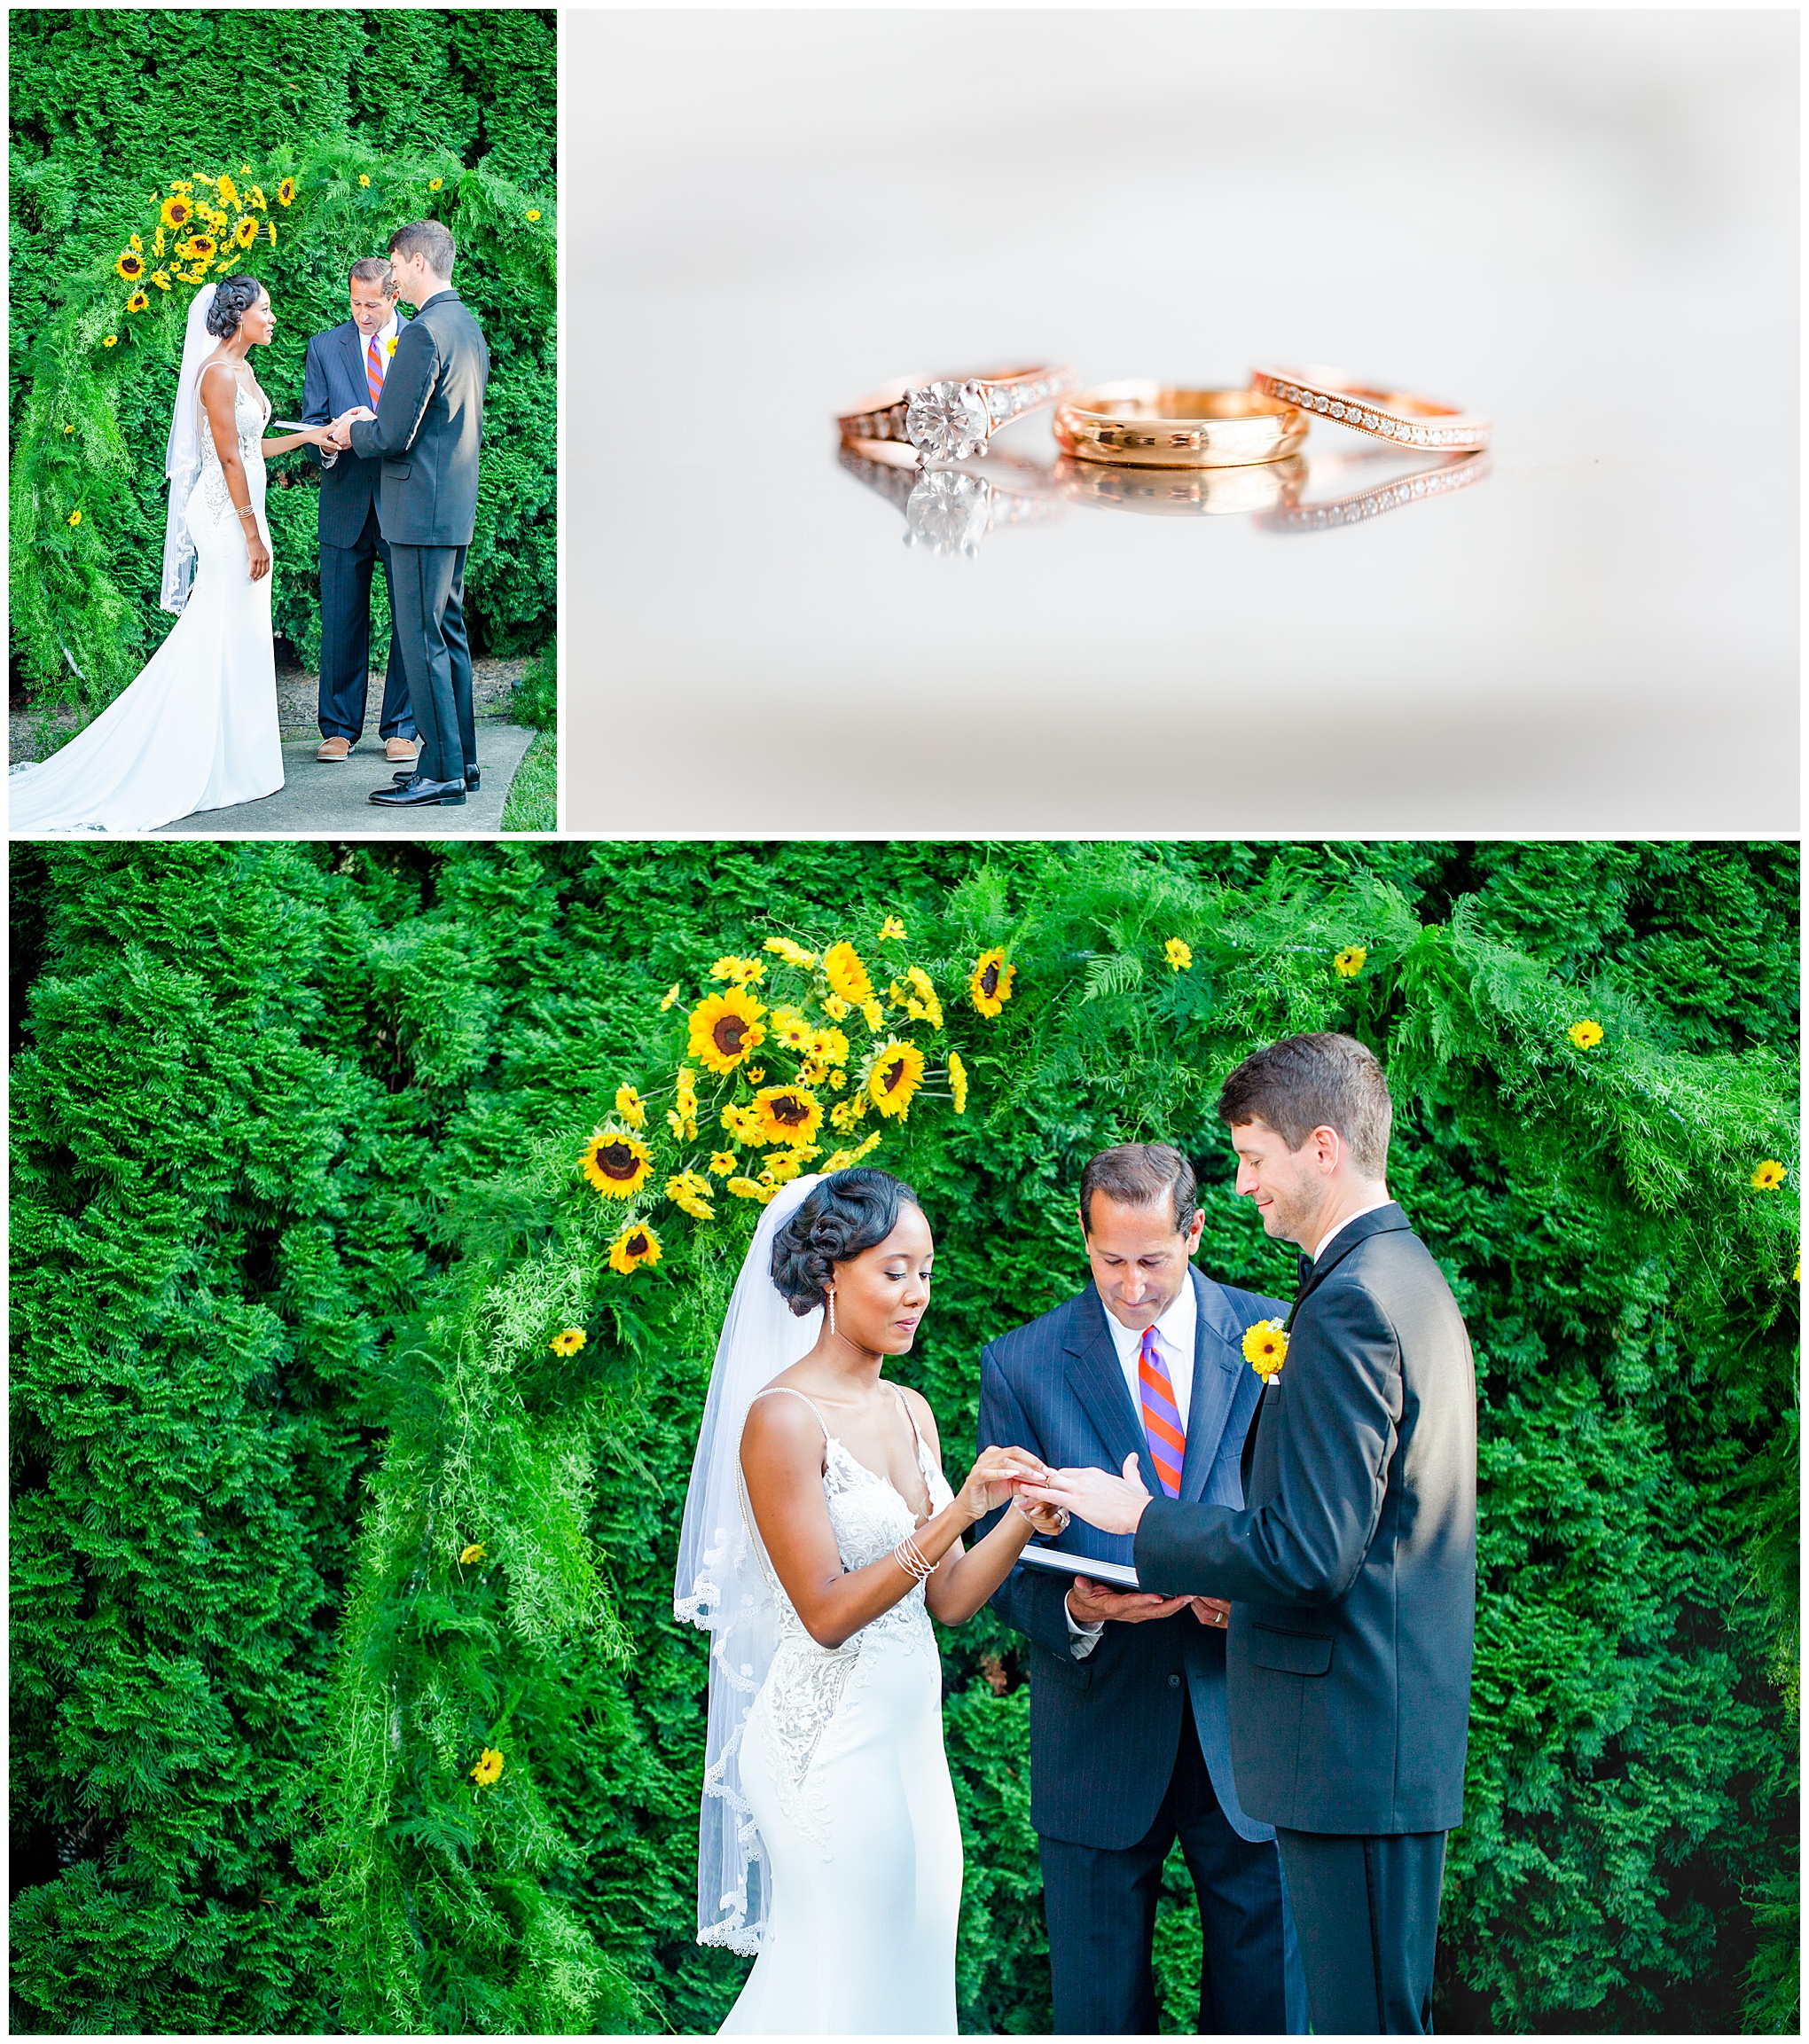 summer mansion at valley country club wedding, Maryland wedding, MD wedding, Maryland wedding photographer, summer wedding, summer wedding inspiration, Baltimore wedding photographer, DC wedding photographer, country club wedding, yellow aesthetic, Rachel E.H. Photography, rings exchange